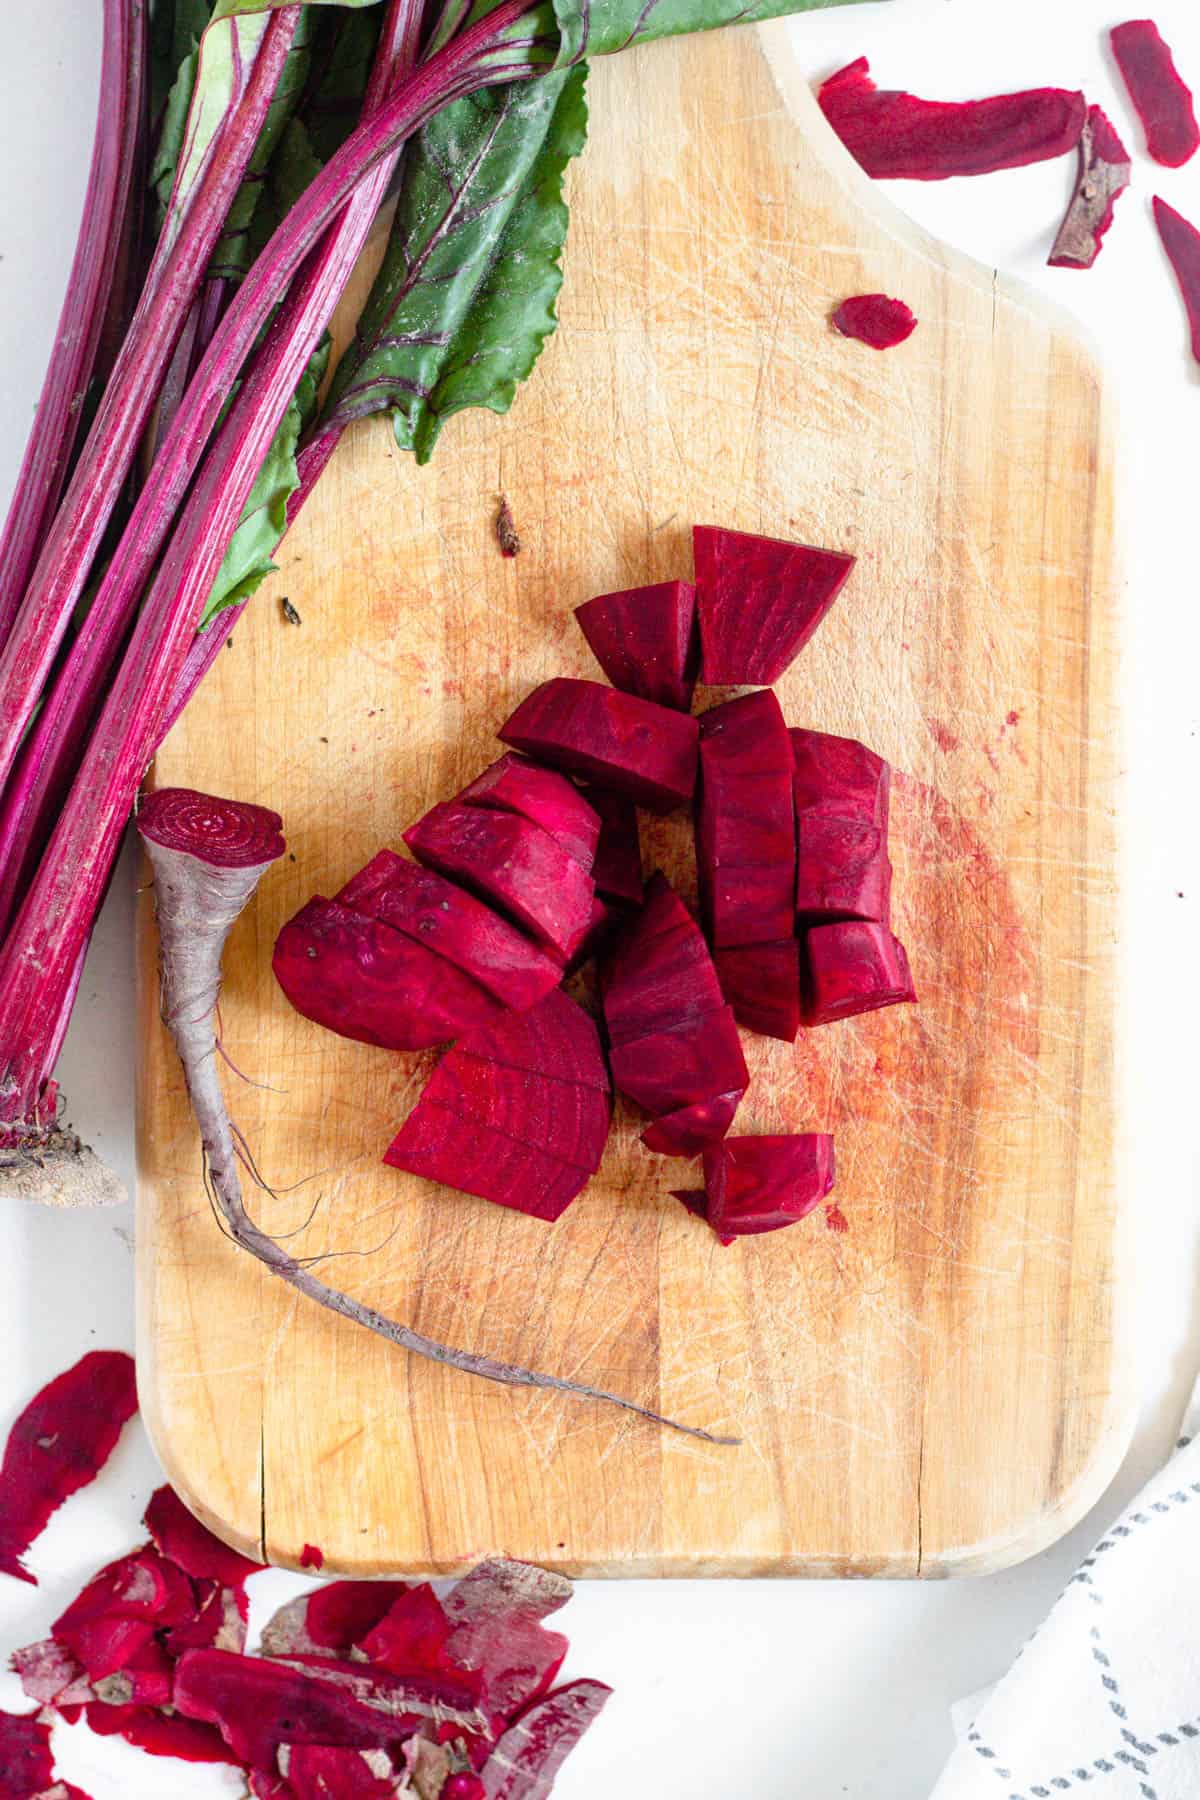 peeled beet on a wooden cutting board with a light colored background